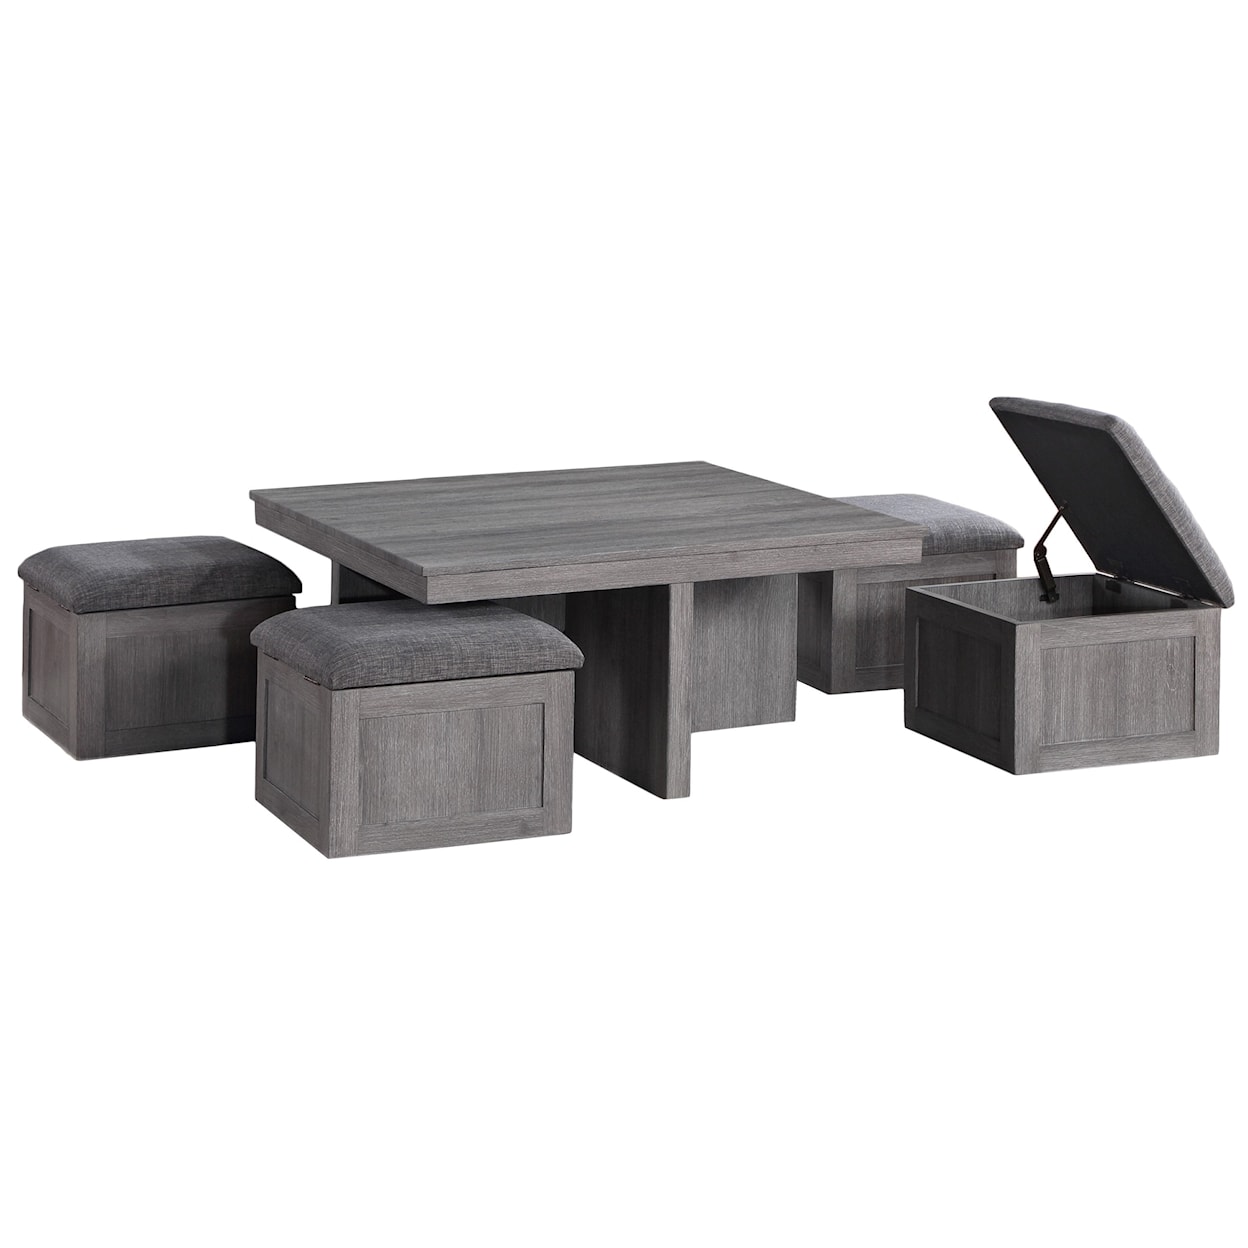 Exclusive Moseberg Coffee Table with Storage Stools